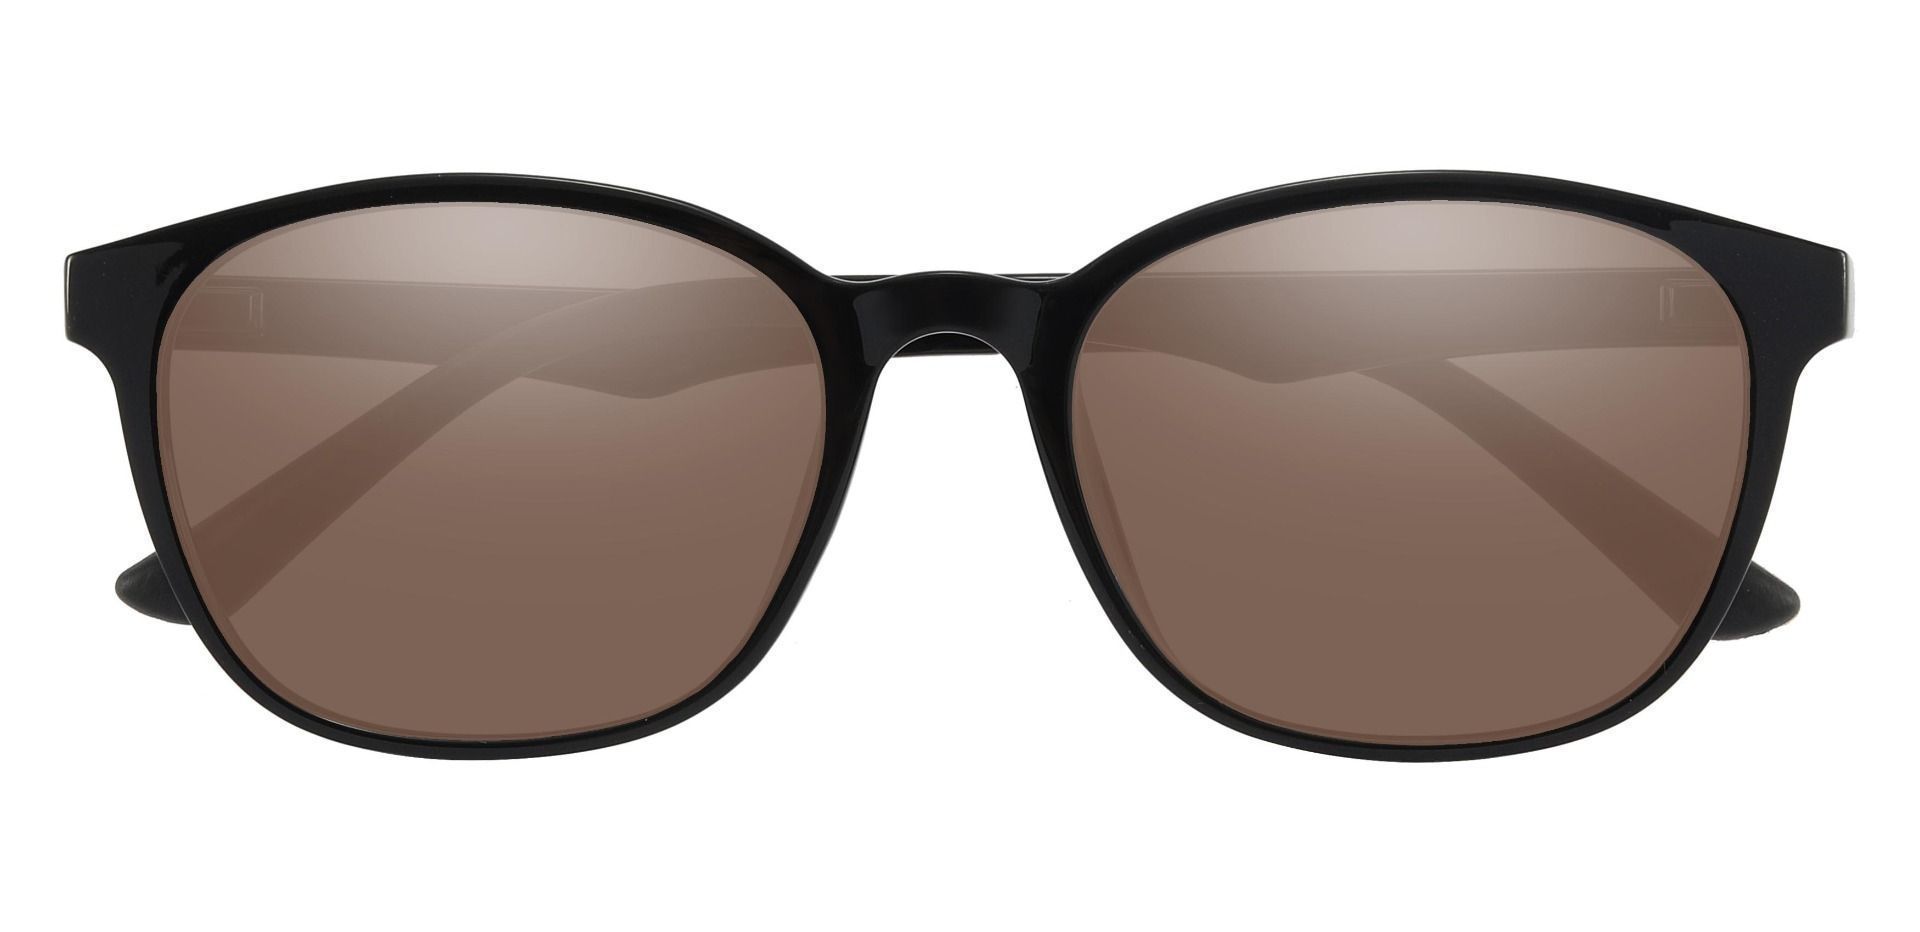 Ursula Oval Reading Sunglasses - Black Frame With Brown Lenses